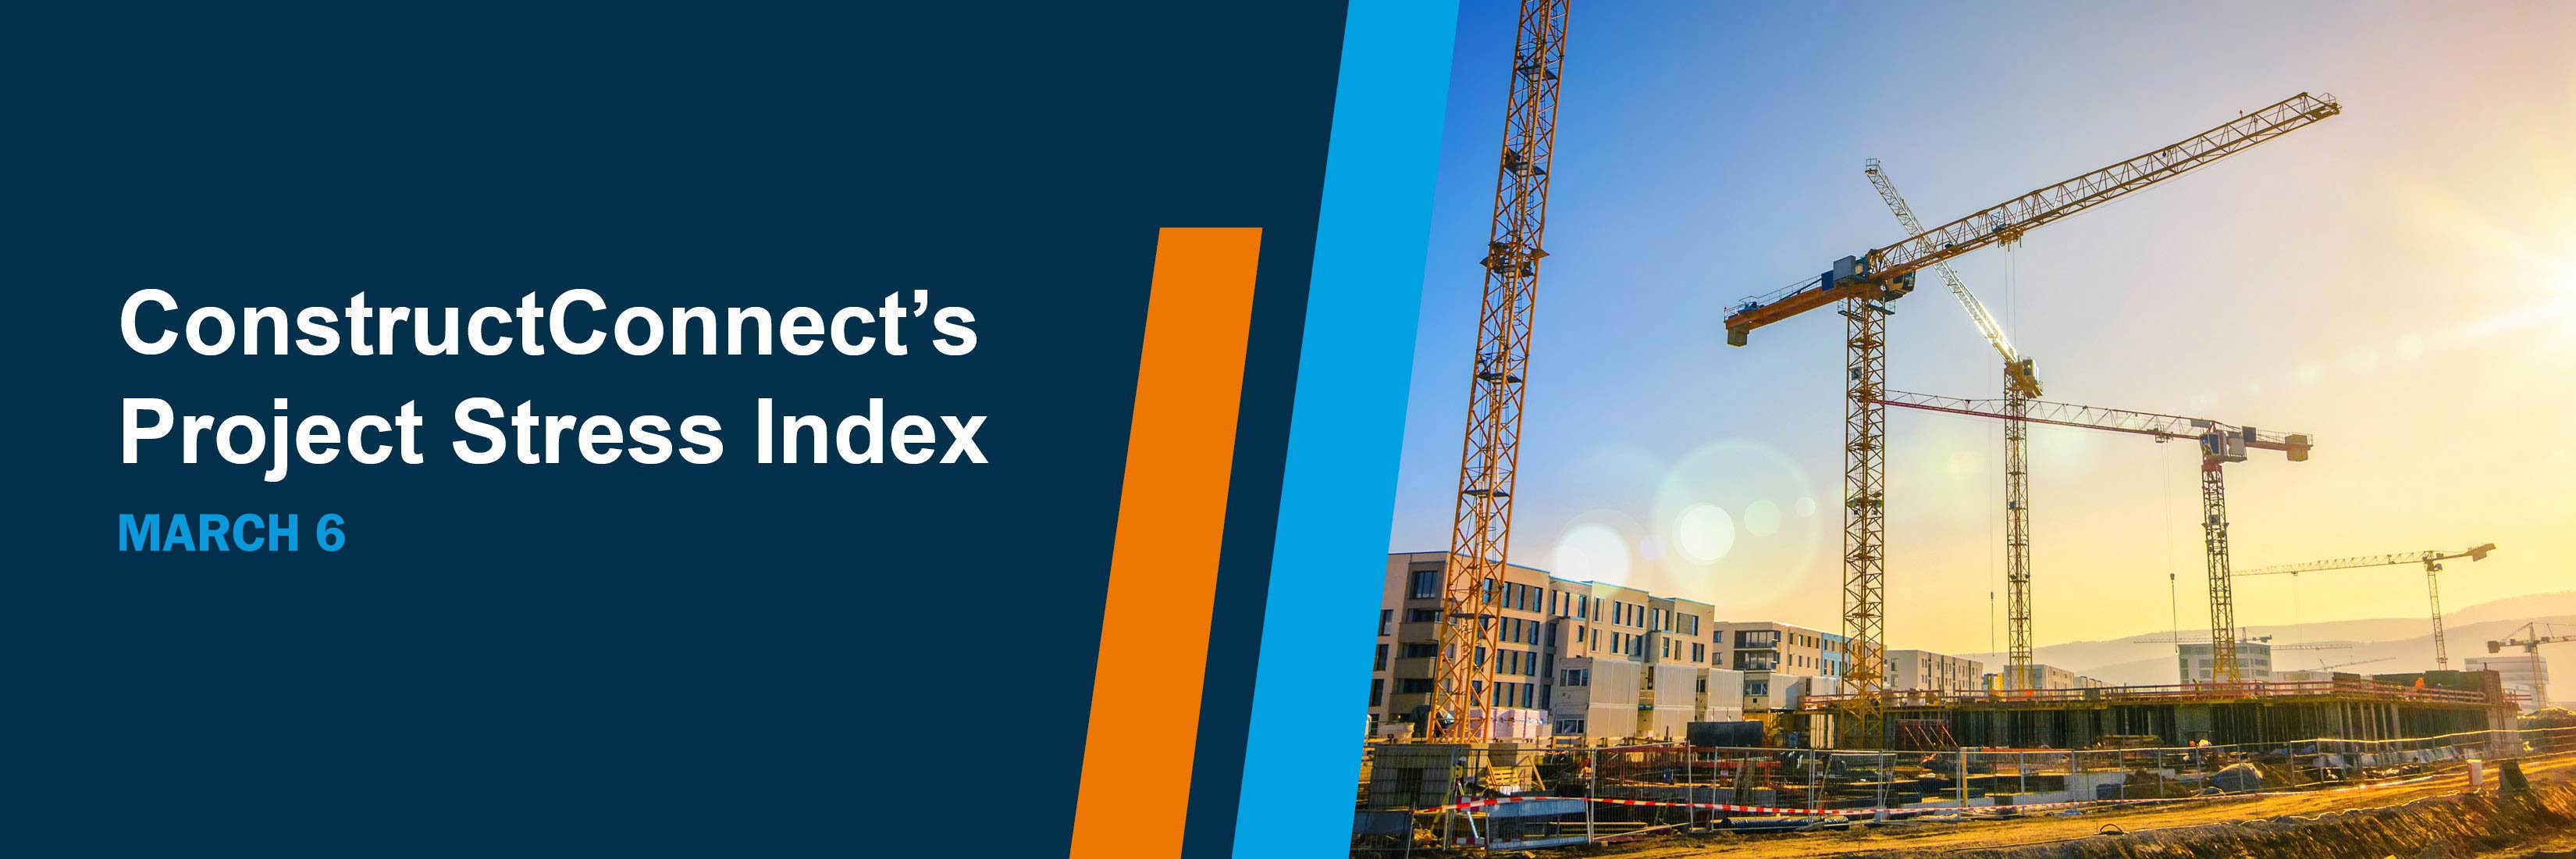 ConstructConnect's Project Stress Index - March 6